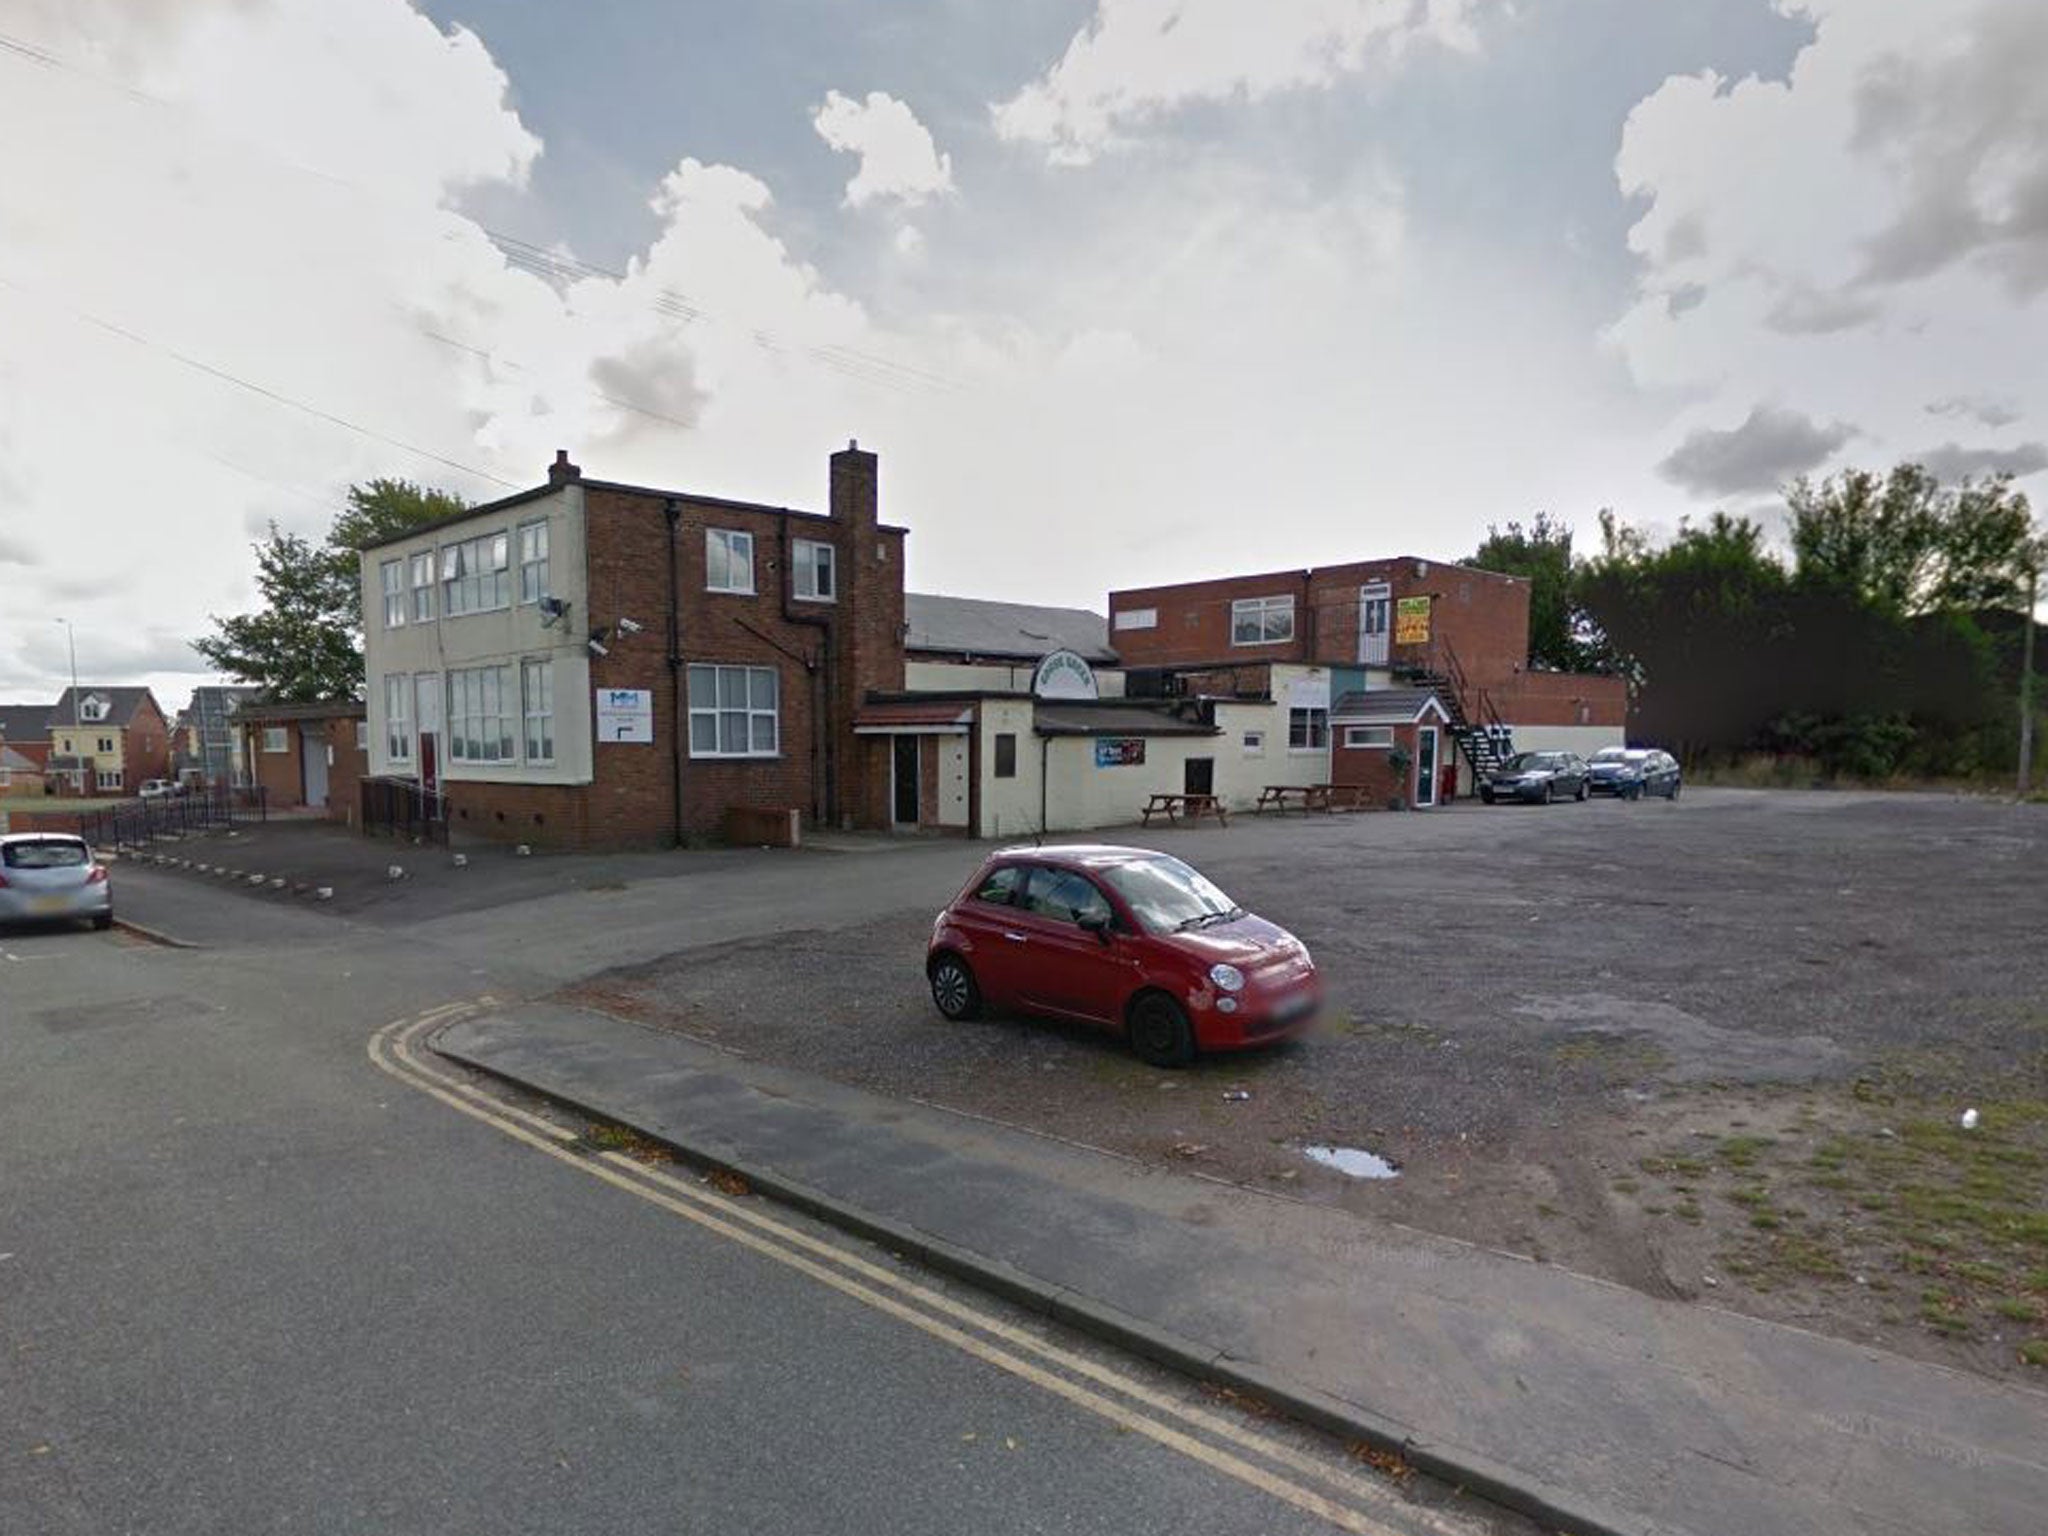 The woman and her partner had left the Goose Green Club in Wigan prior to the attack